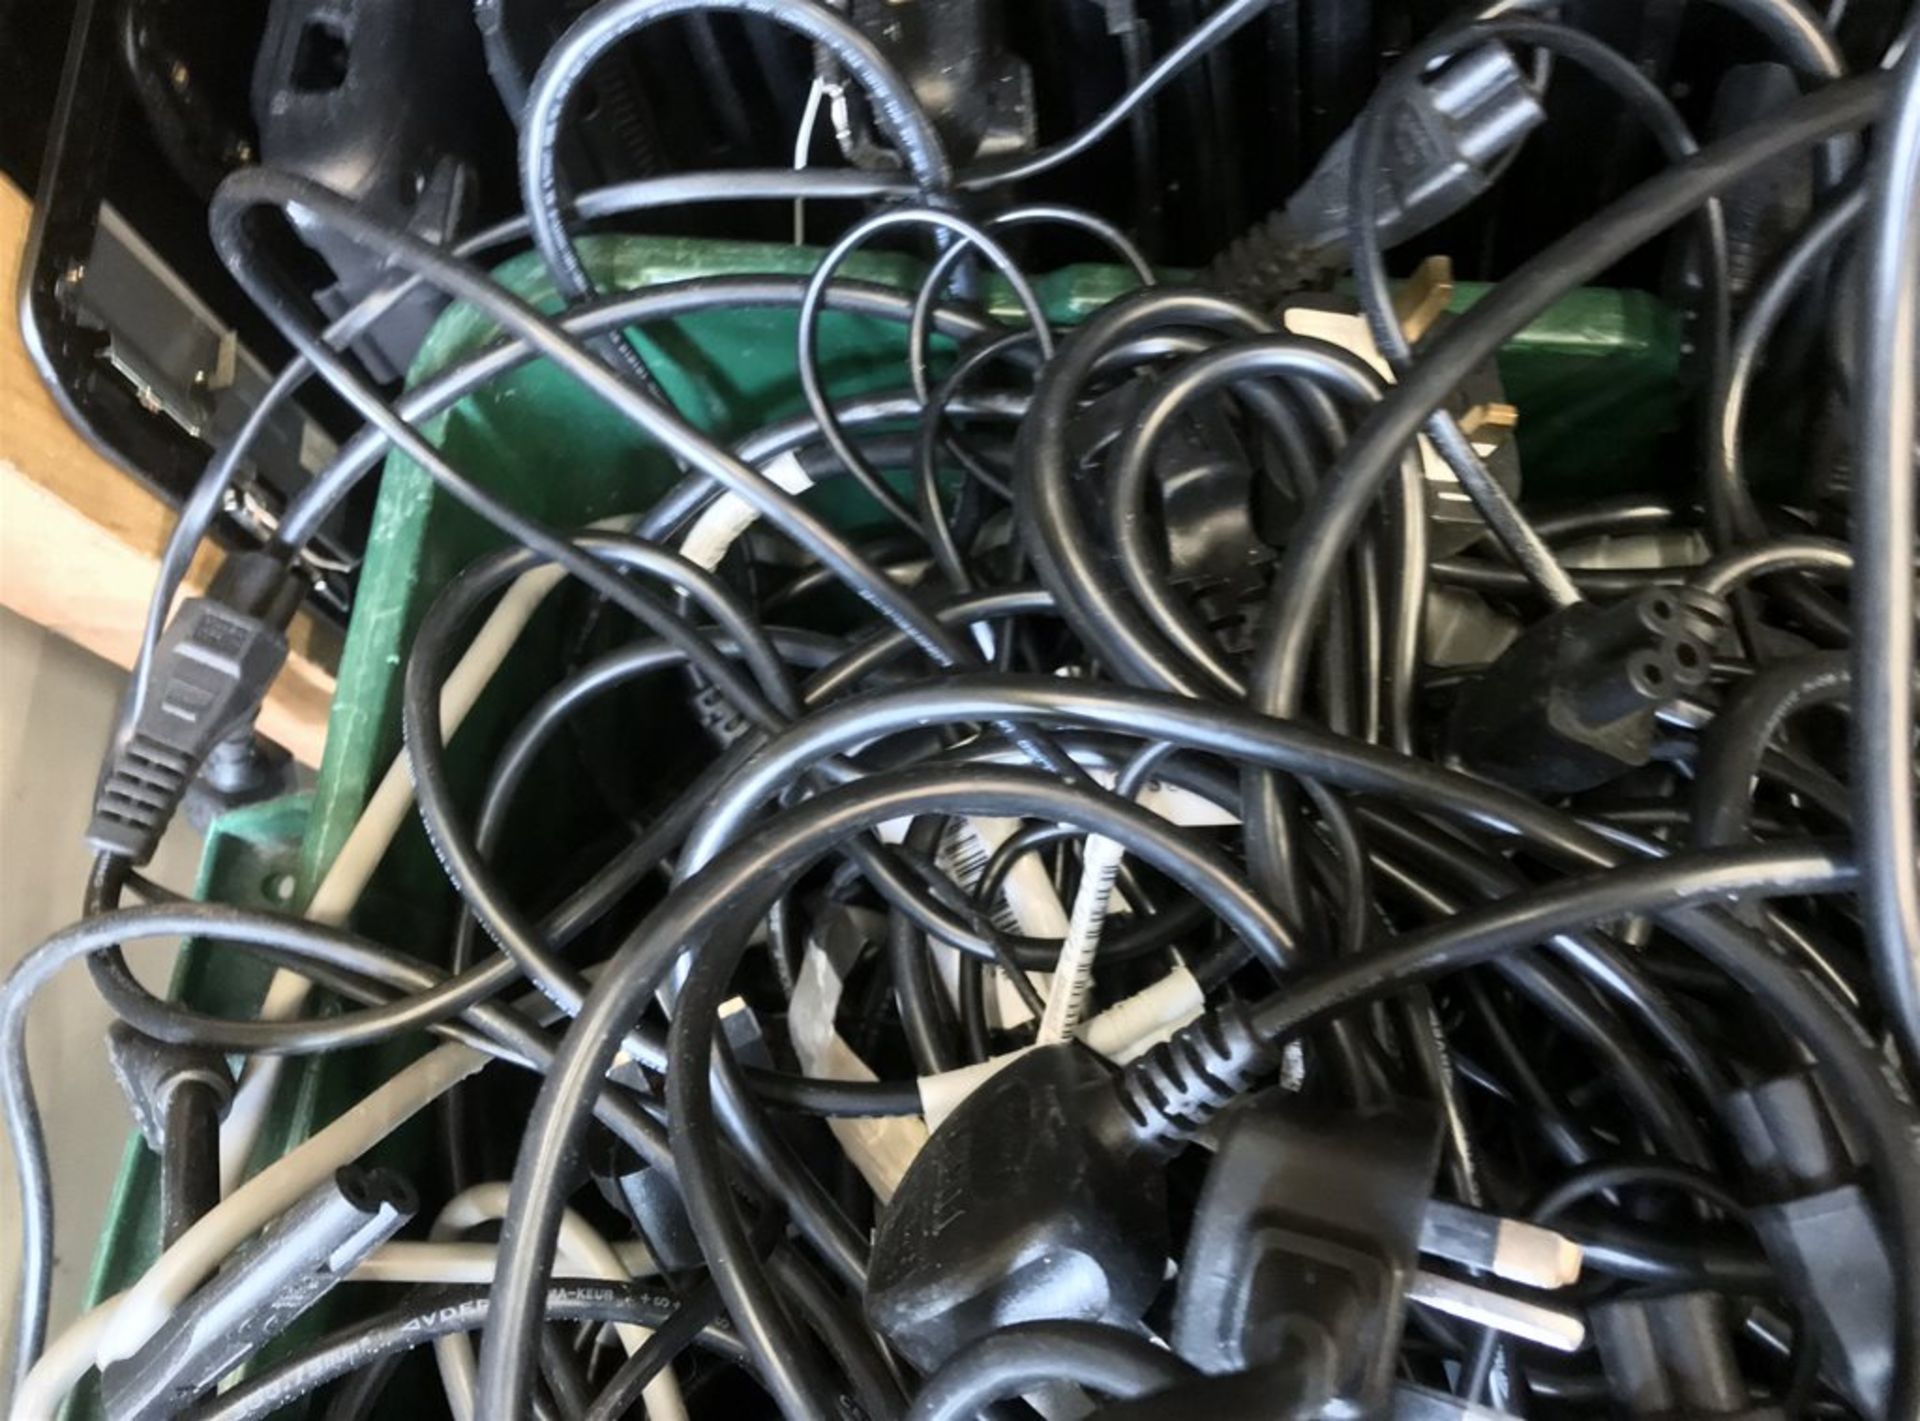 Approx 150x Power Cables Kettle, Clover Leaf and Others - Majority 3 Pin - Image 3 of 4